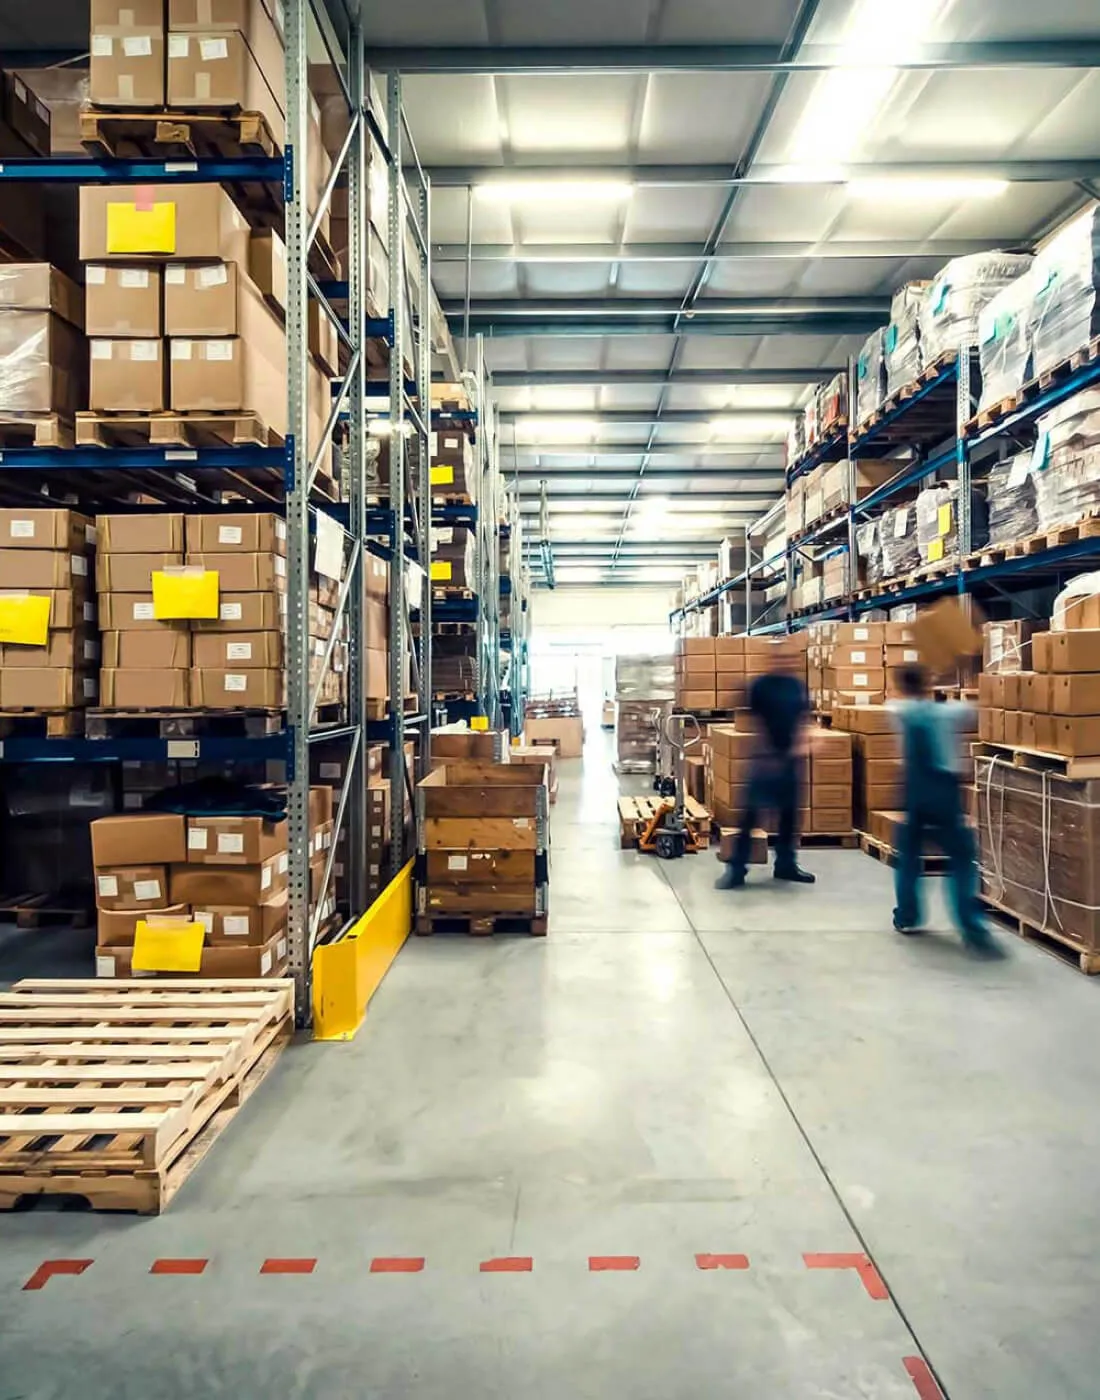 image of two workers moving boxes in a warehouse with a blurred effect to show movement